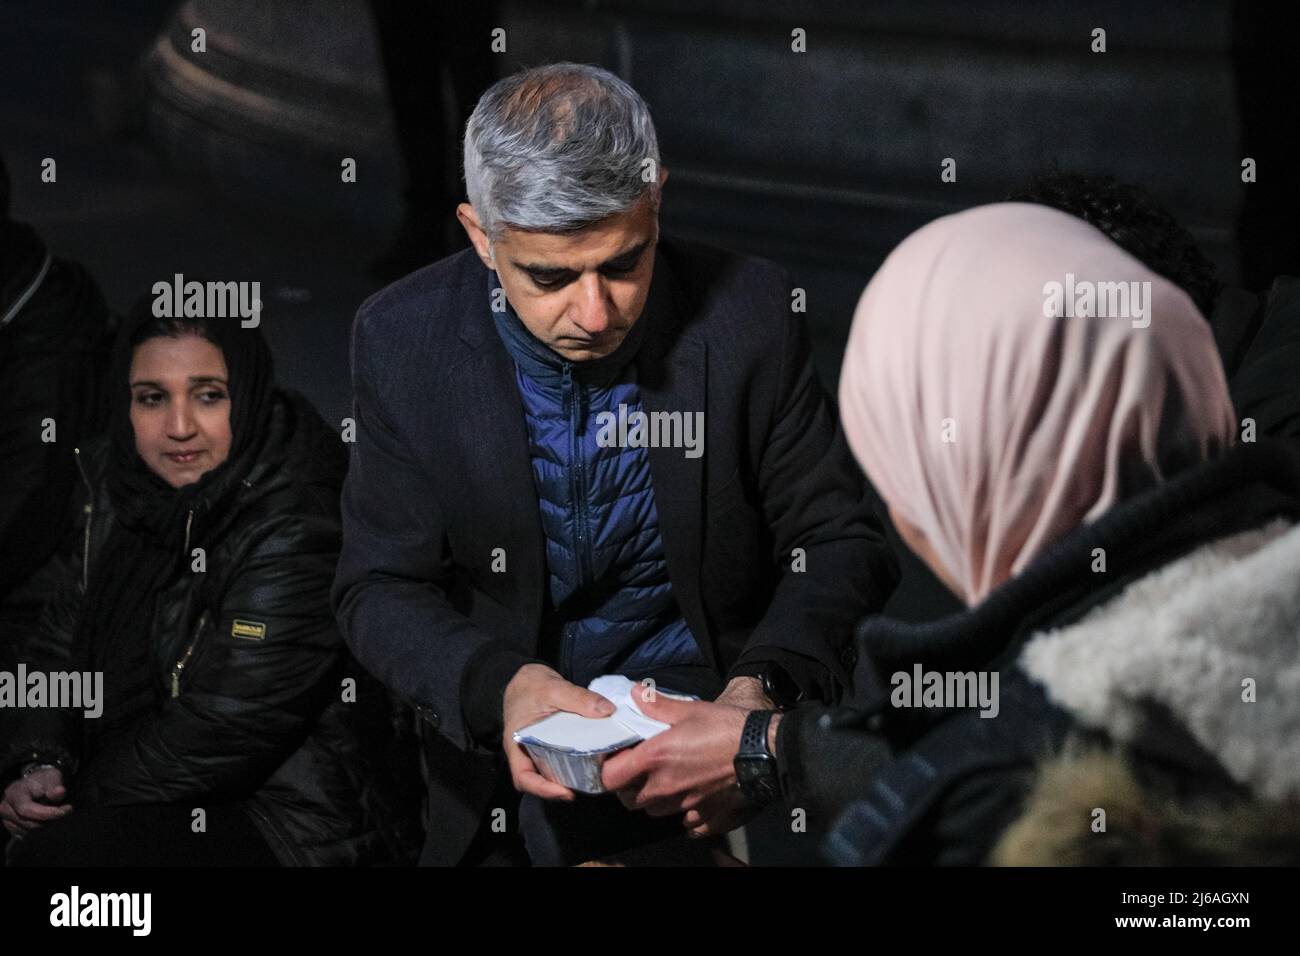 London, UK, 29th April 2022. Mayor of London Sadiq Khan helps to distribute meals down the rows of seated diners. The UK's largest Open Iftar, organised bz Ramadan Tent Project, brings together people from all communities to share an Iftar (evening meal) to break fast during what is now the final week of the Islamic holy month of Ramadan. The event is attended by Sadiq Khan, Mayor of London, and around 2,000 members of the public. Credit: Imageplotter/Alamy Live News Stock Photo